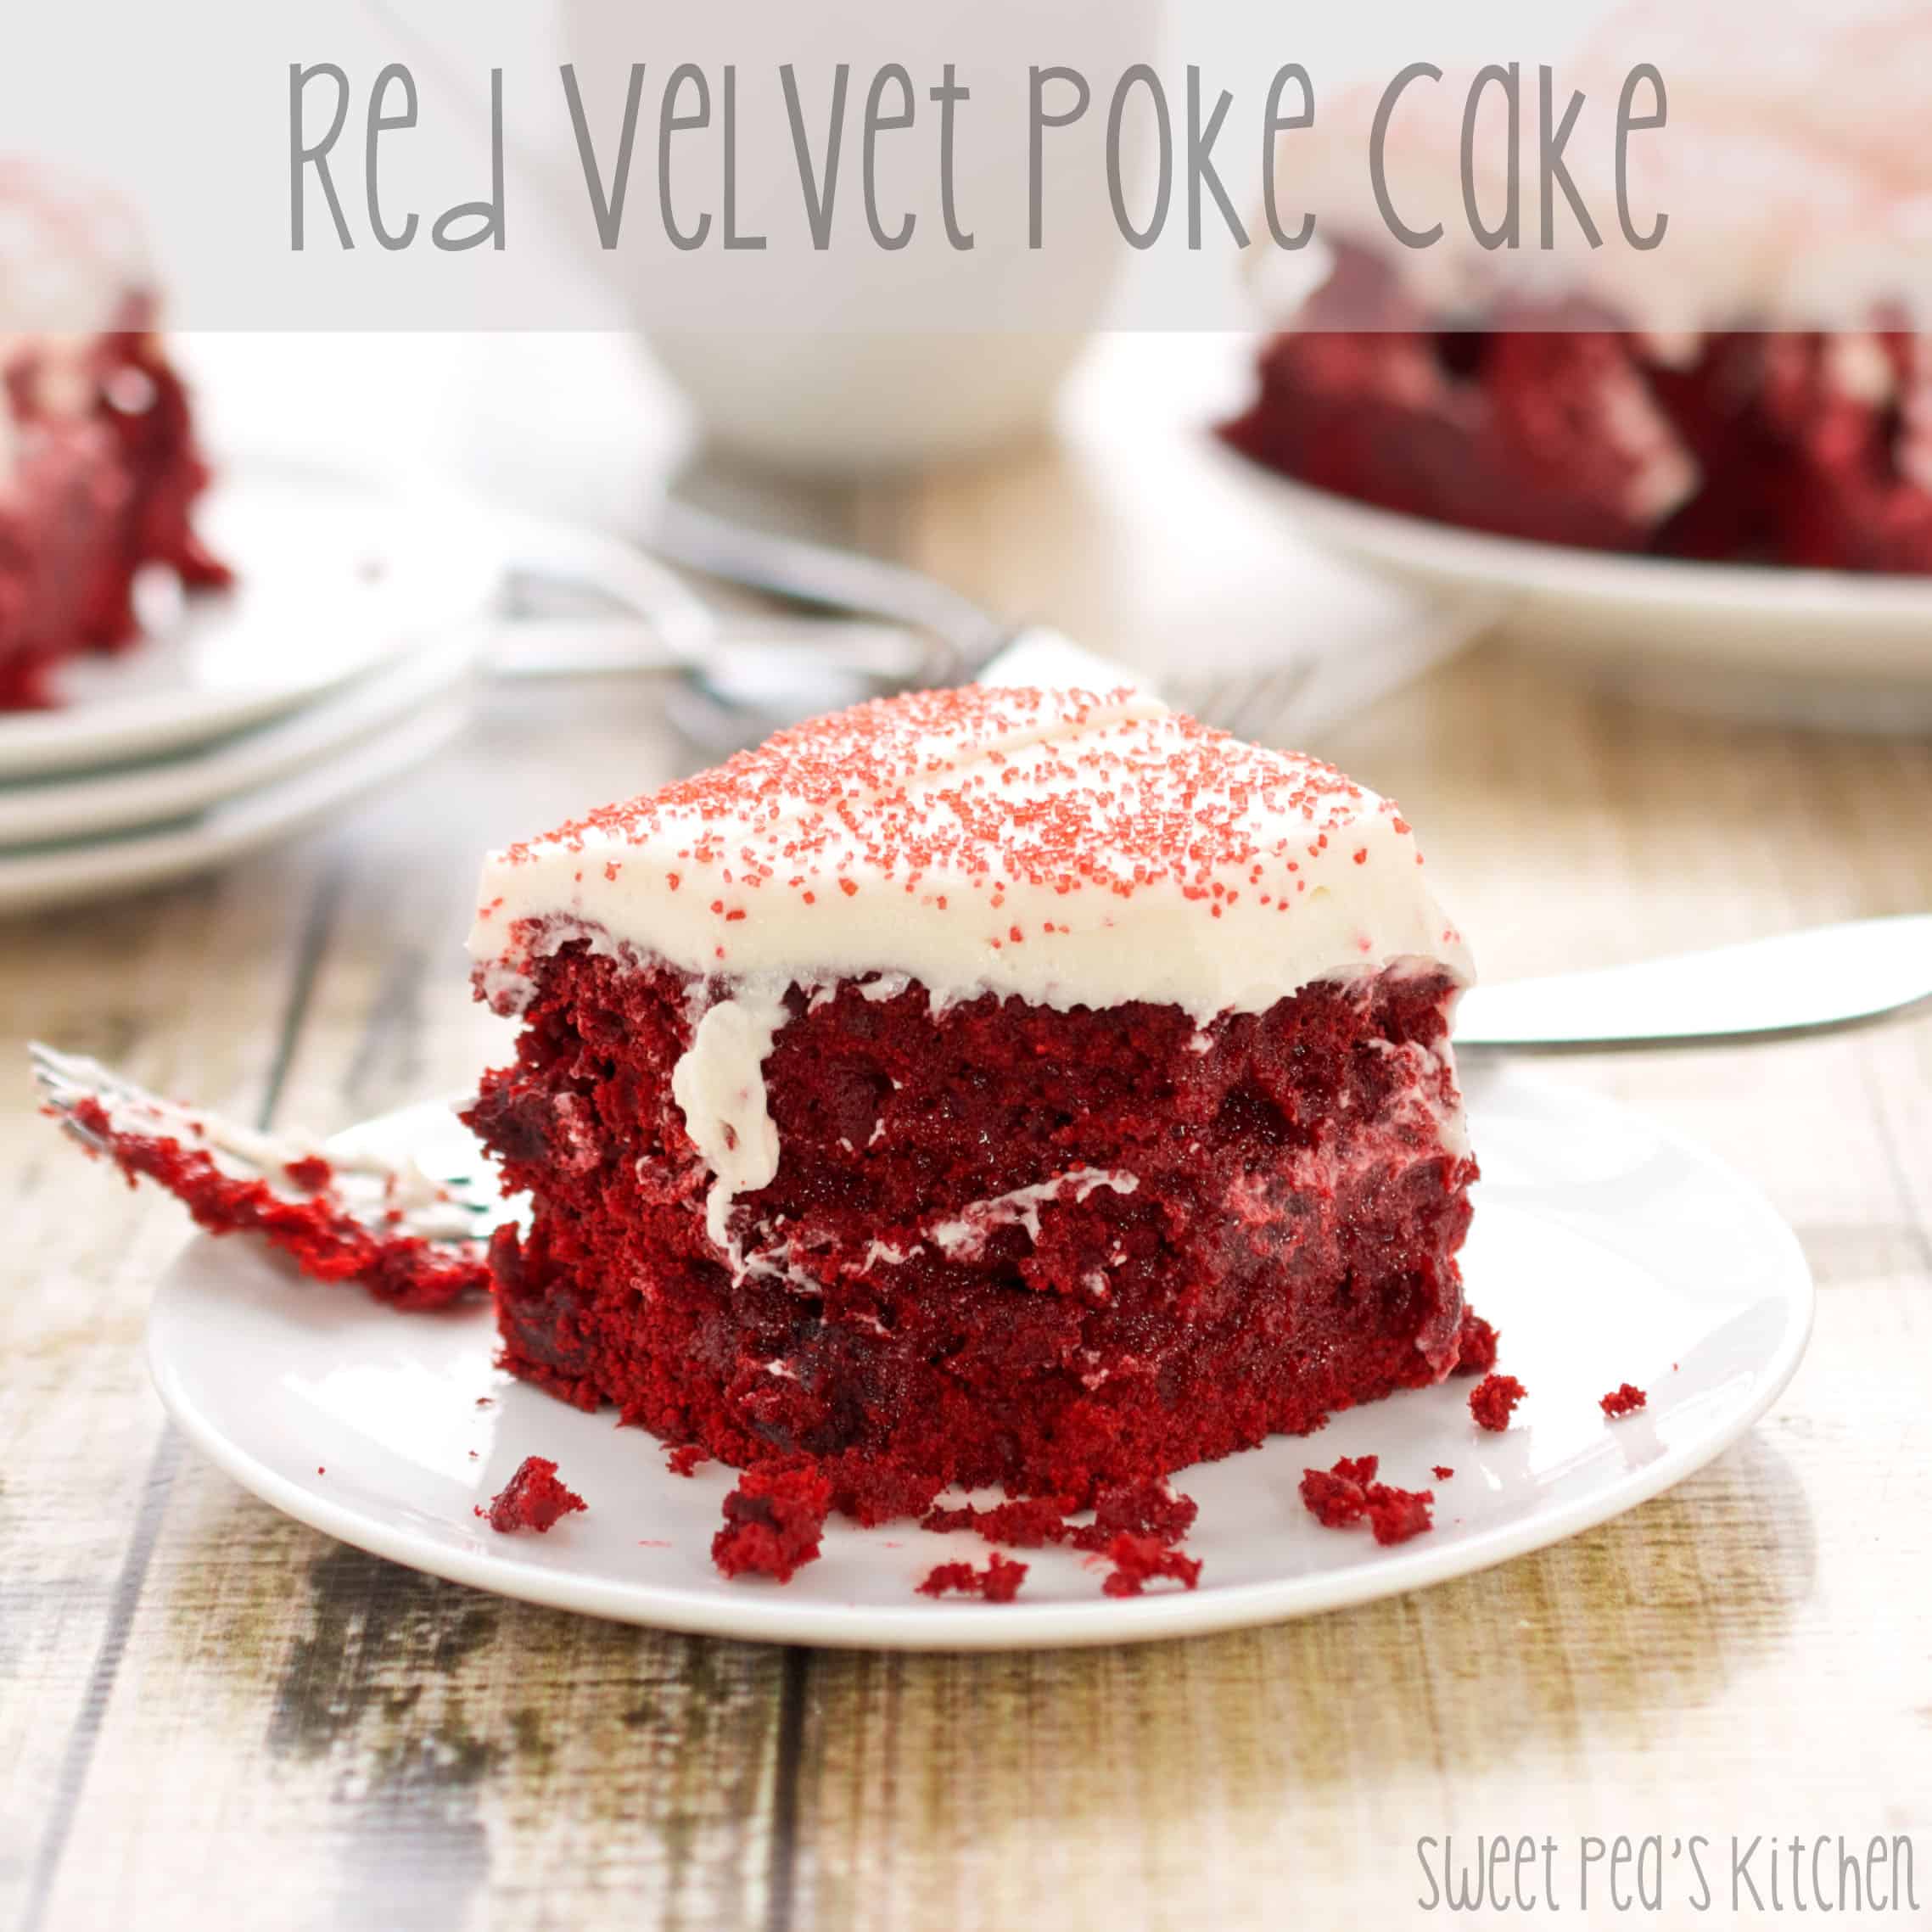 several pieces of red velvet poke cake on plates